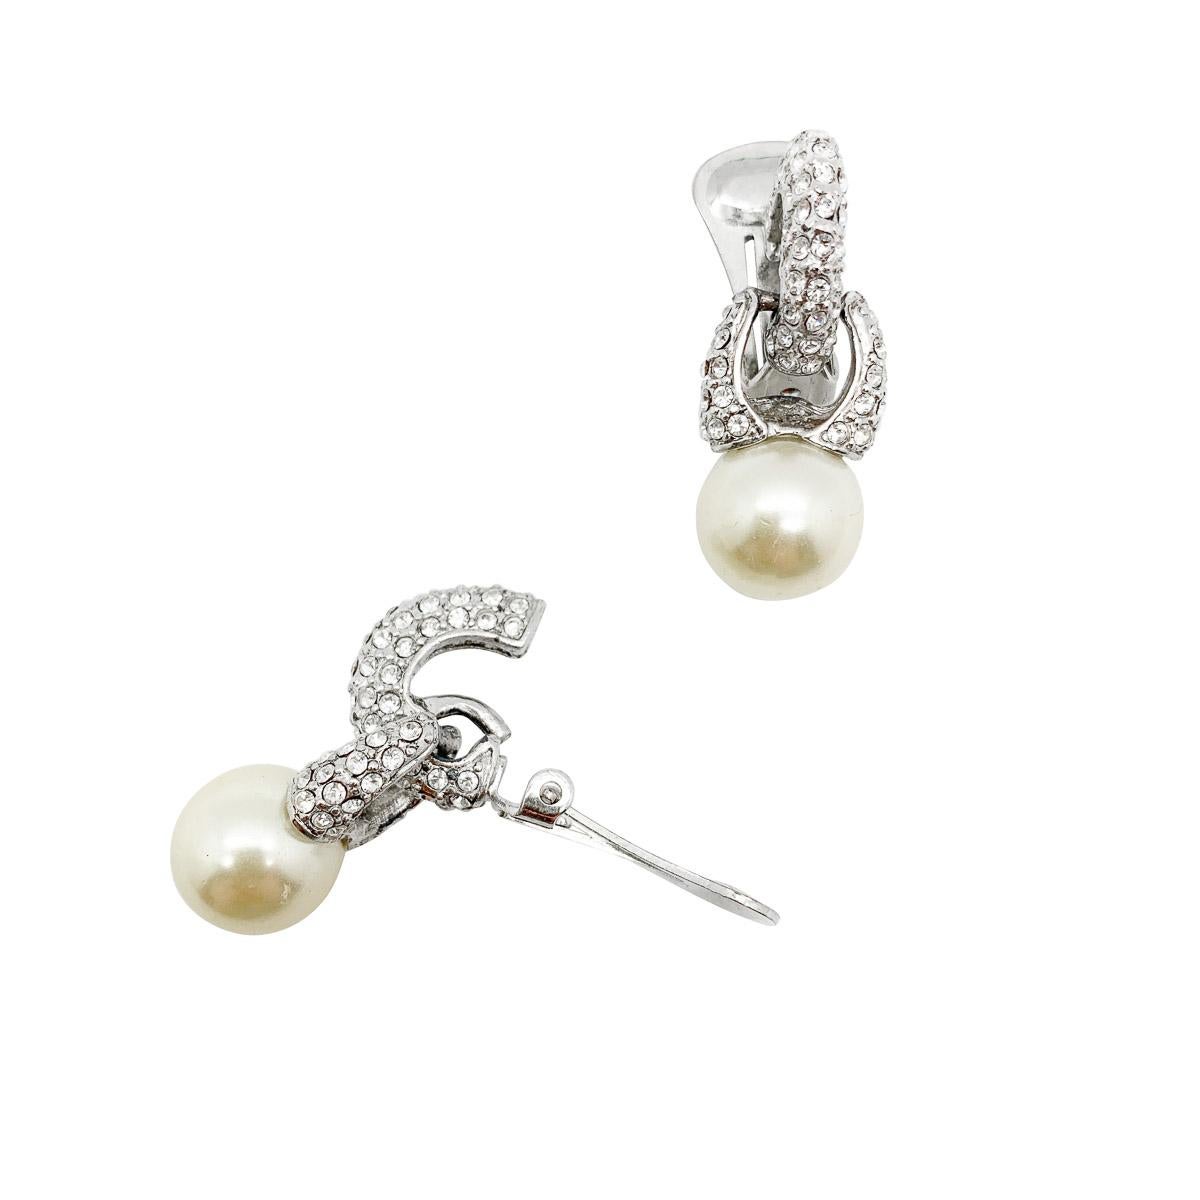 A pair of vintage pearl drop earrings. Featuring a crystal huggie style hoop leading to a crystal embellished pearl drop. A perfectly timeless pearl and crystal clip that will prove invaluable.

Vintage Condition: Very good without damage or